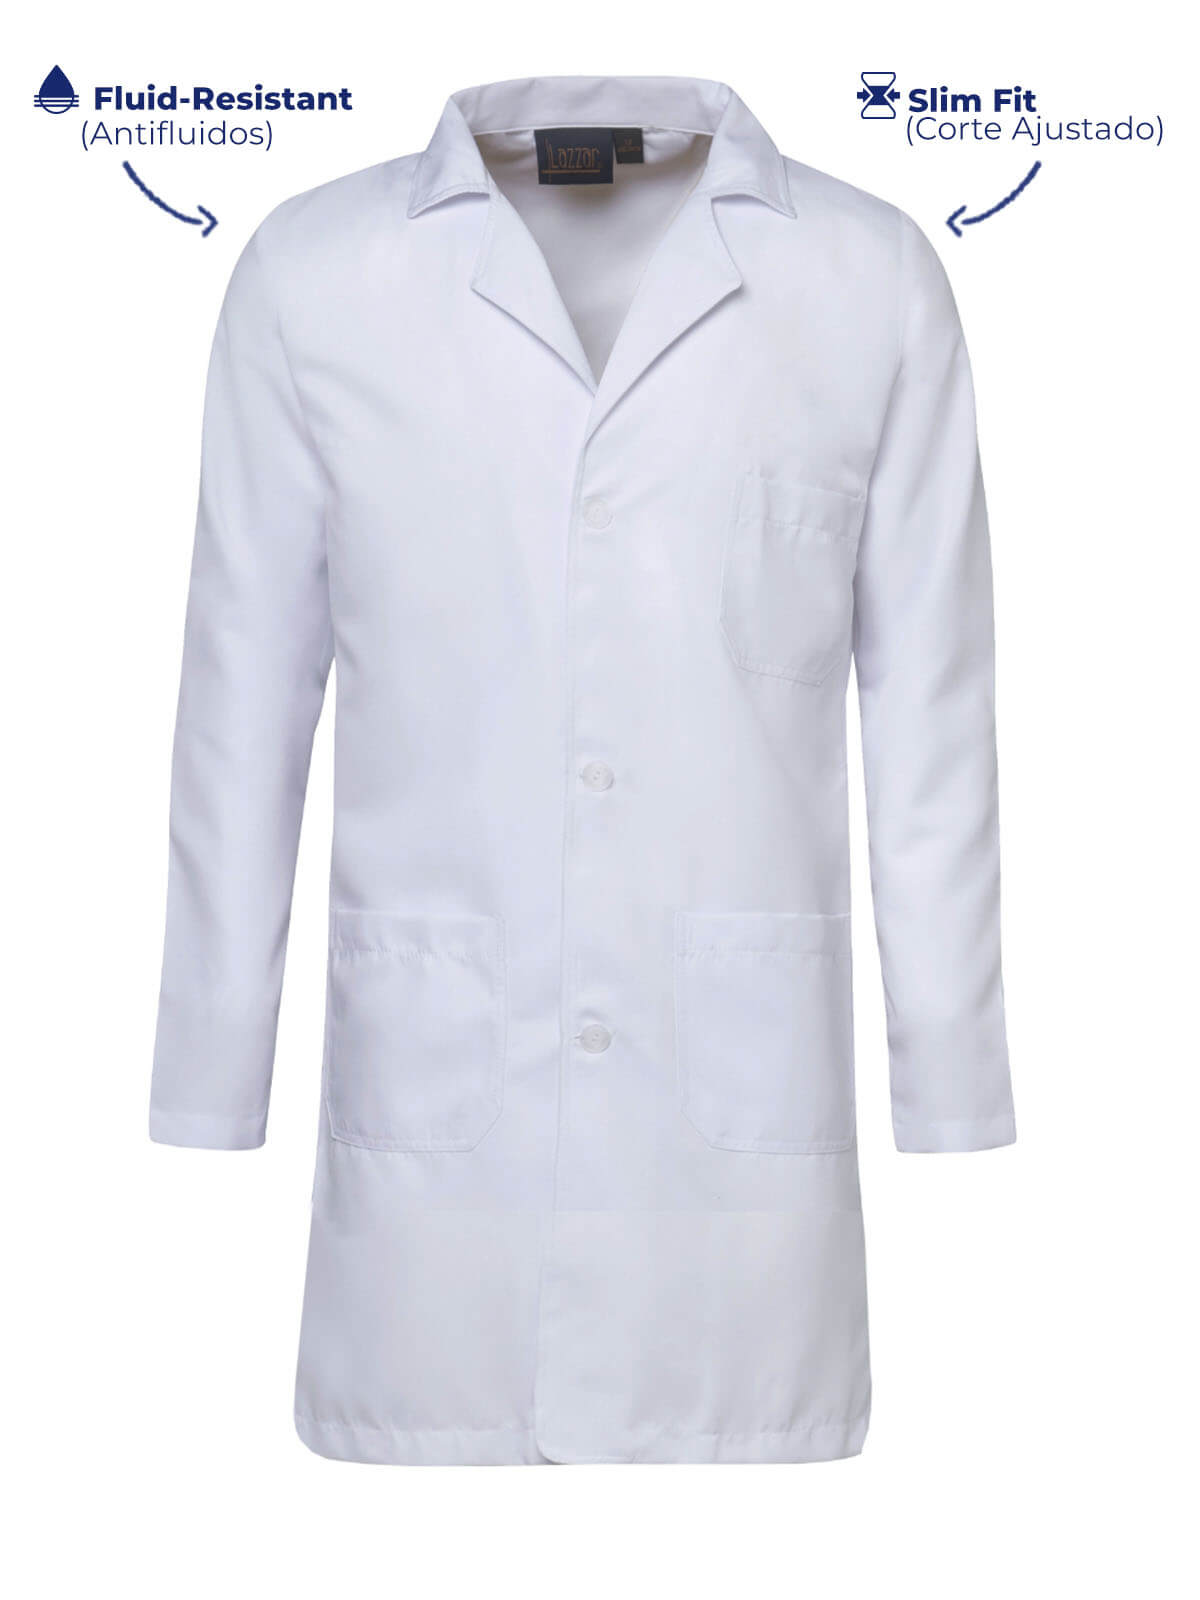 embroidered lab coat